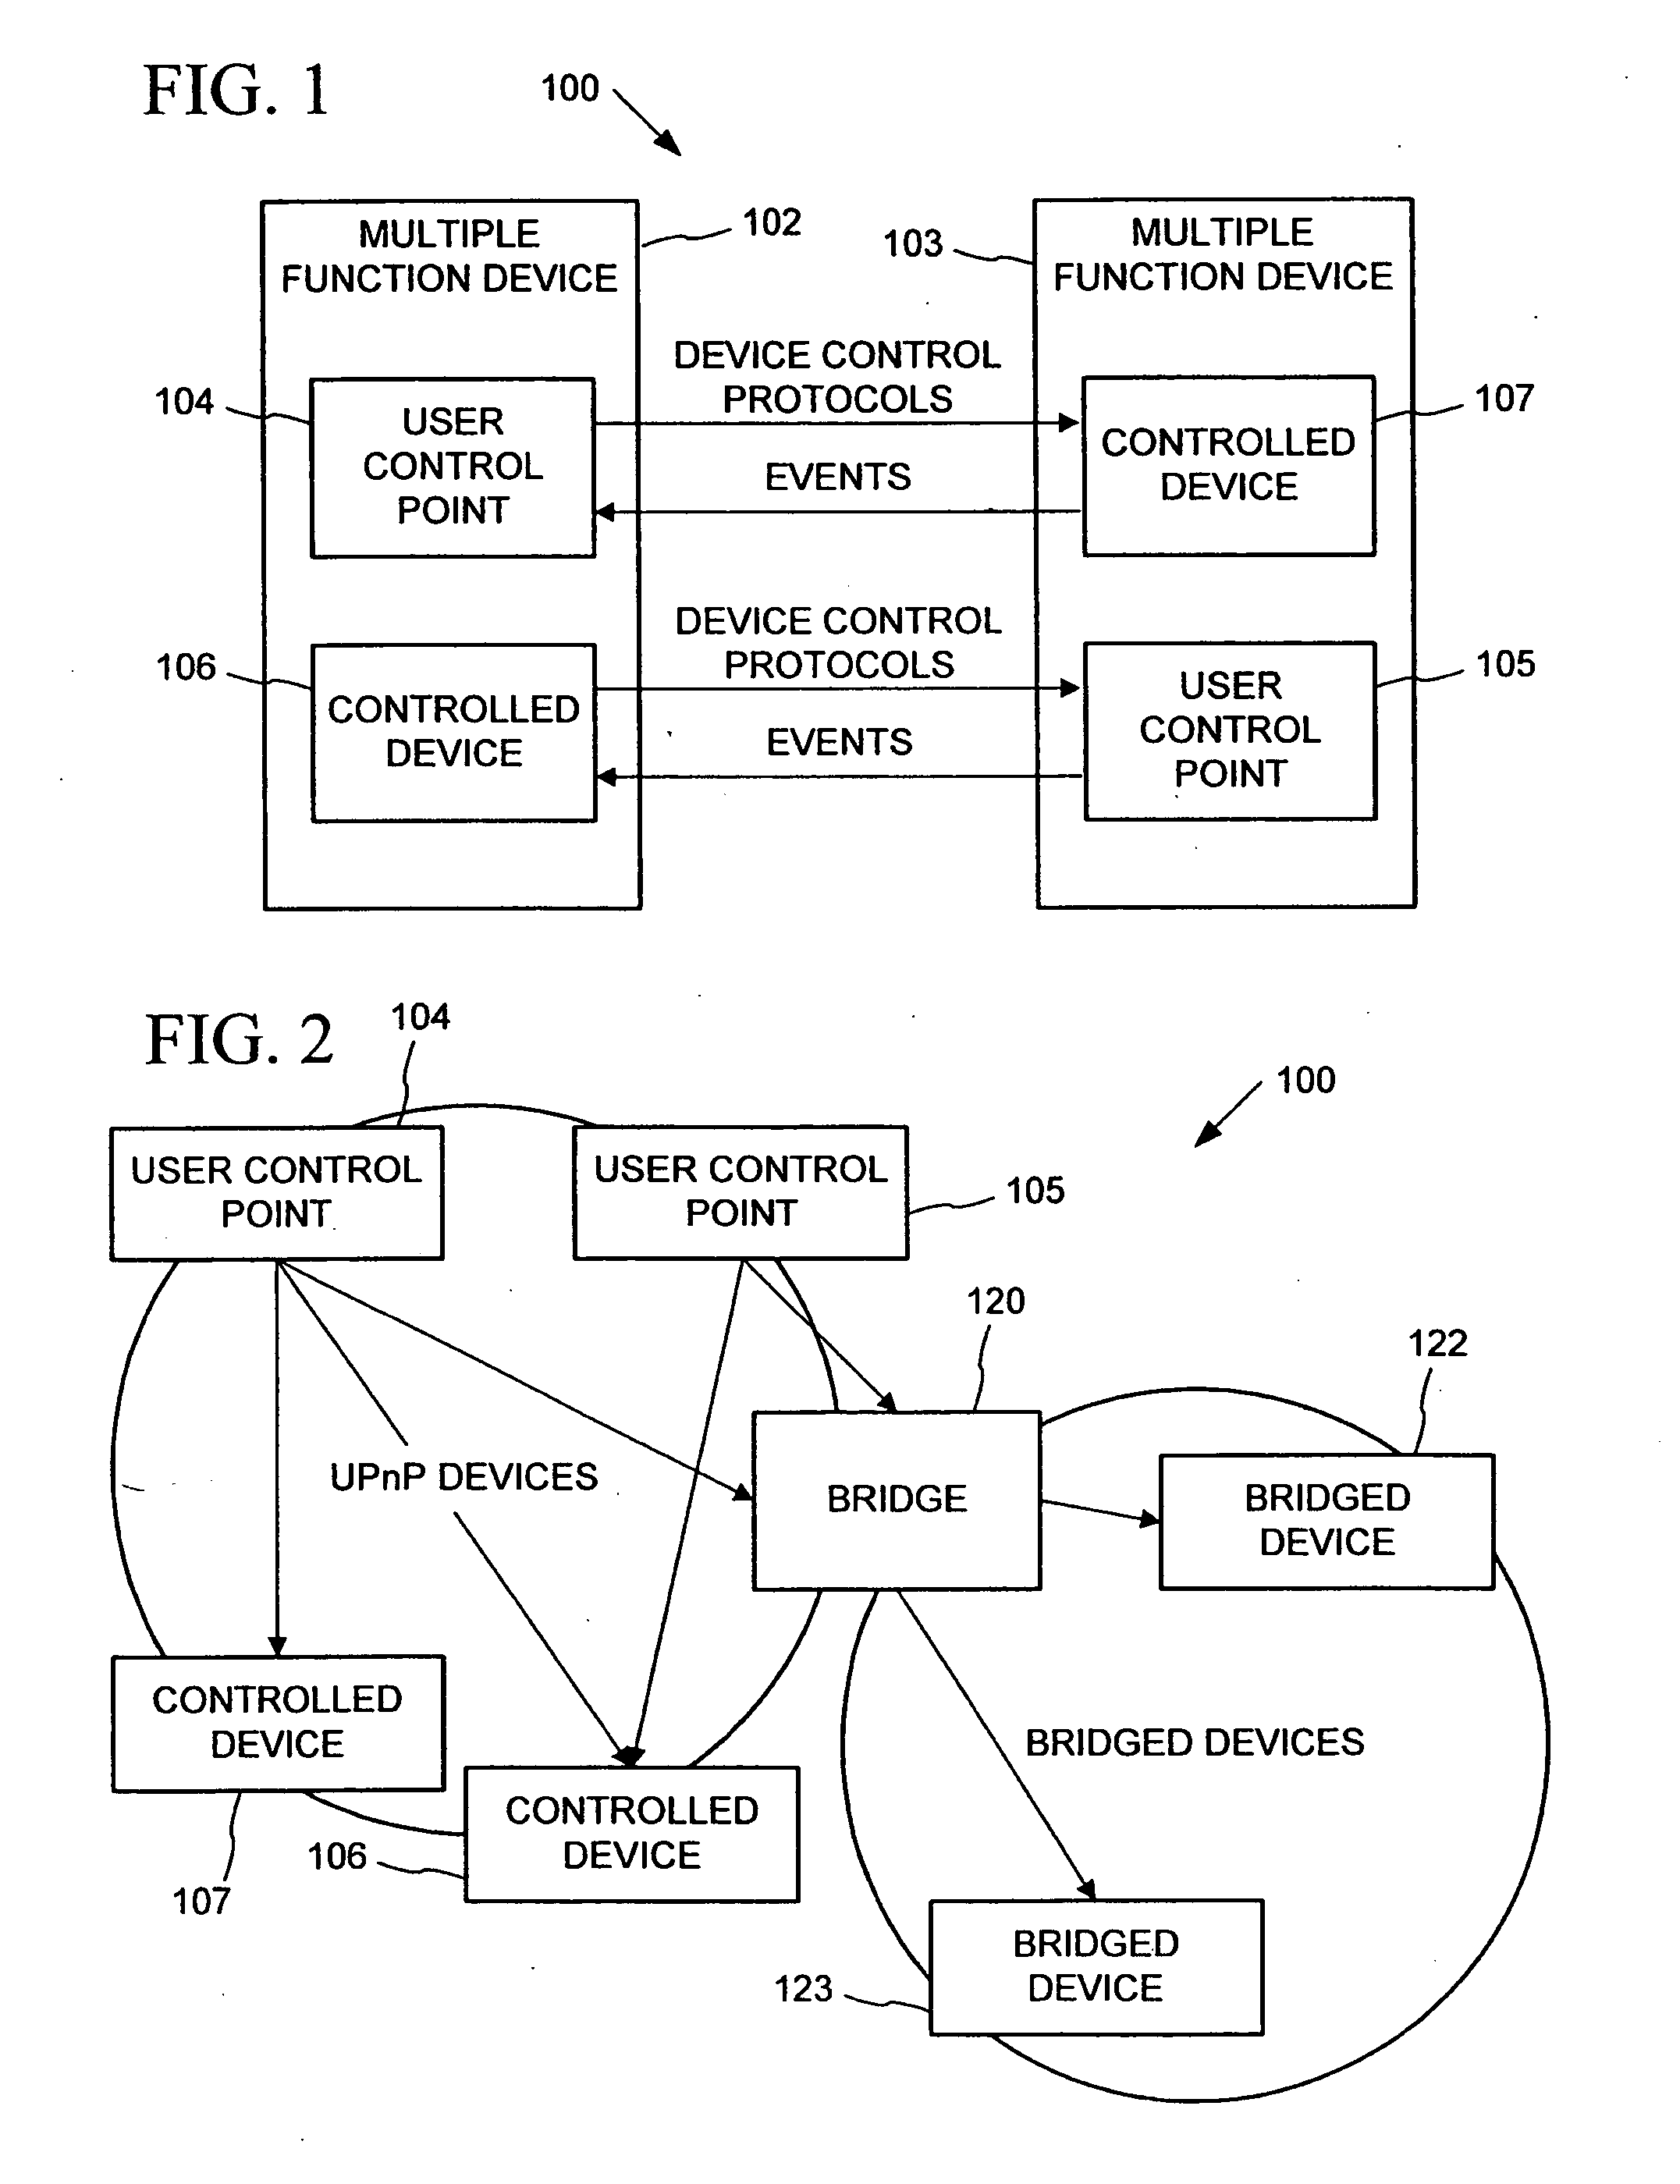 Dynamic self-configuration for ad hoc peer networking